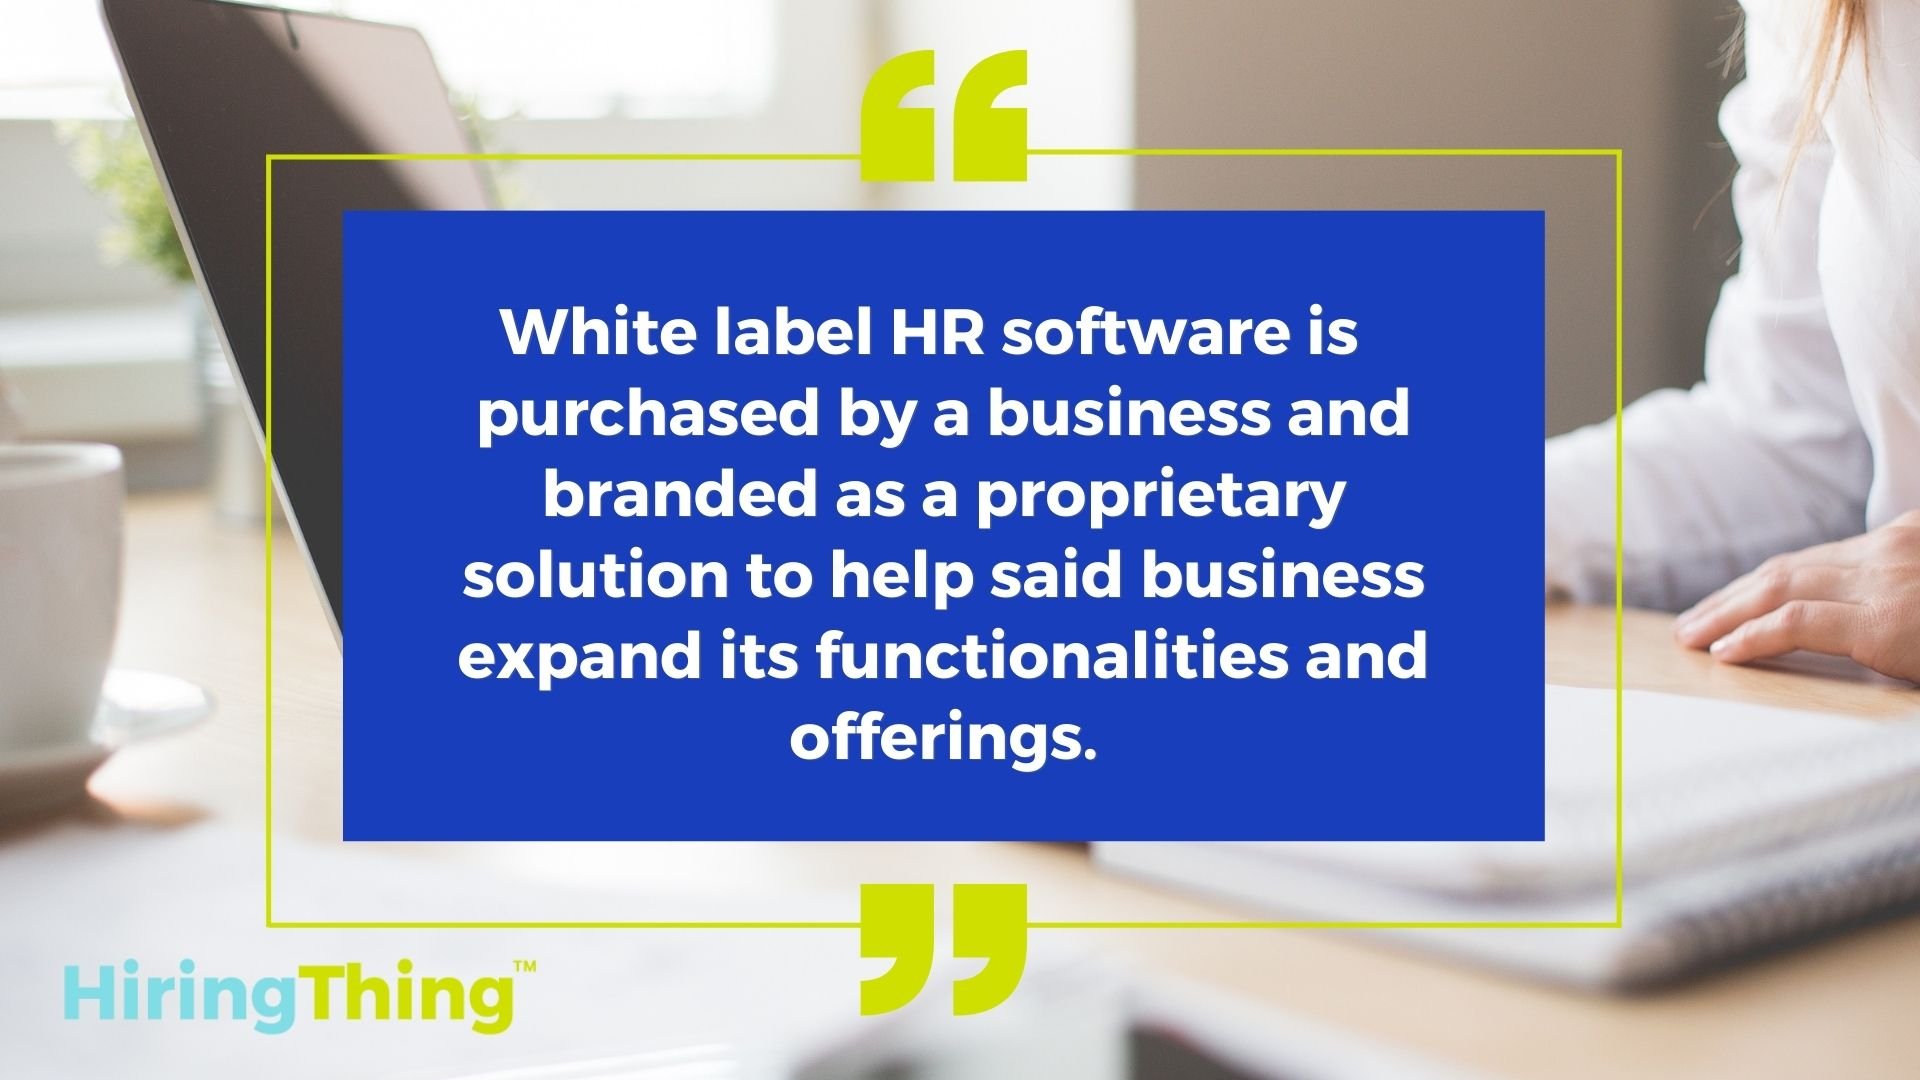 This is an infographic that reads "White label HR software is purchased by a business and branded as a proprietary solution to help said business expand its functionalities and offerings.